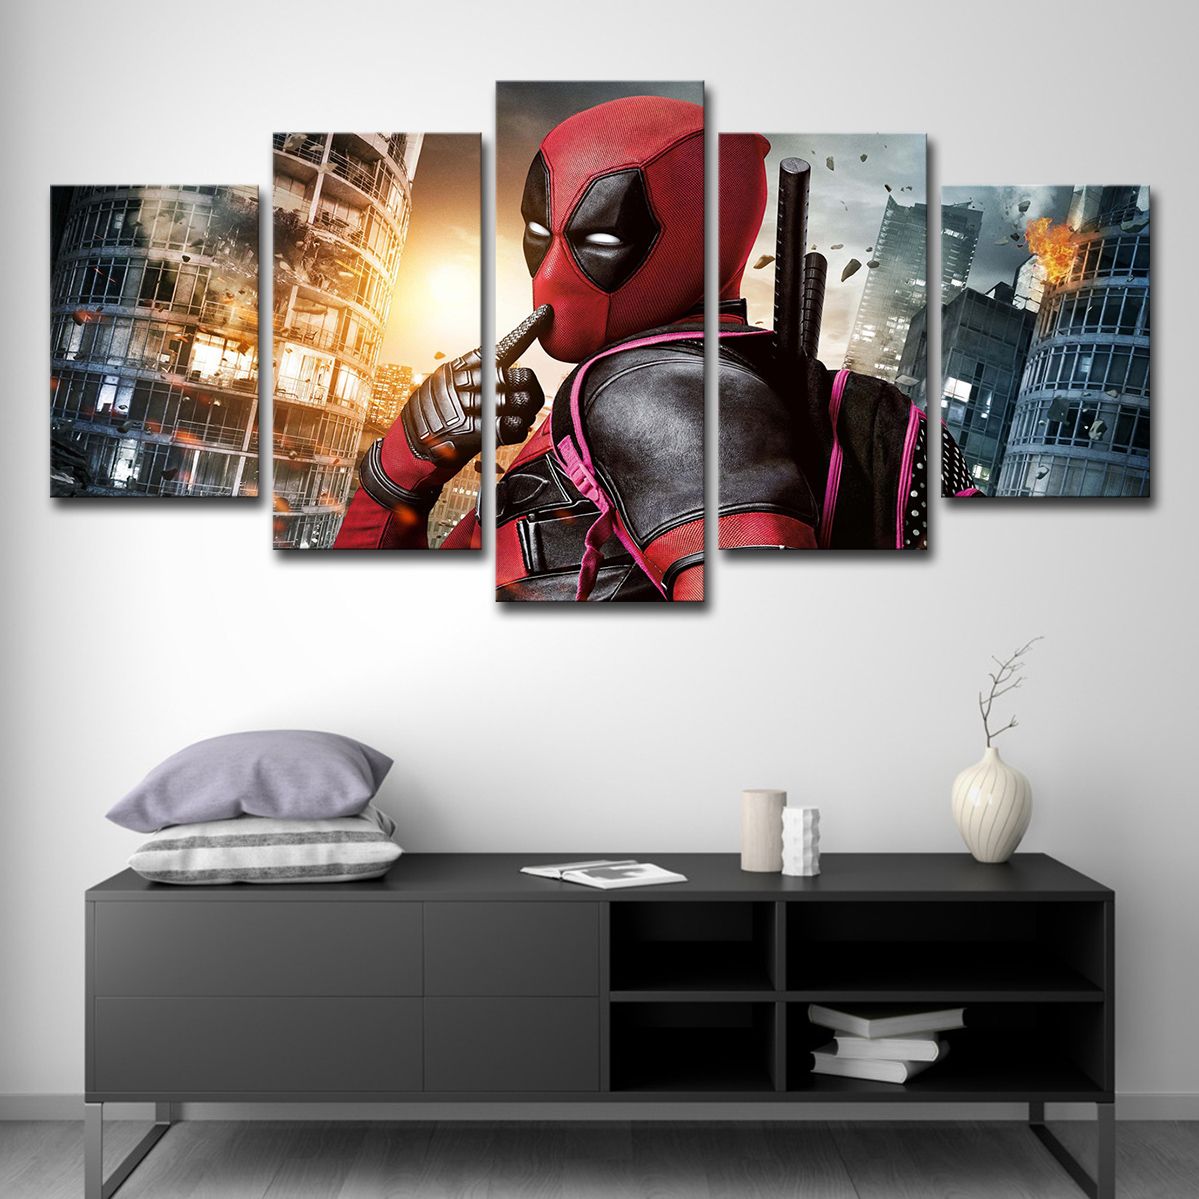 12x18 Deadpool Canvas HD Printing Painting Home Decor Room Wall Art Picture